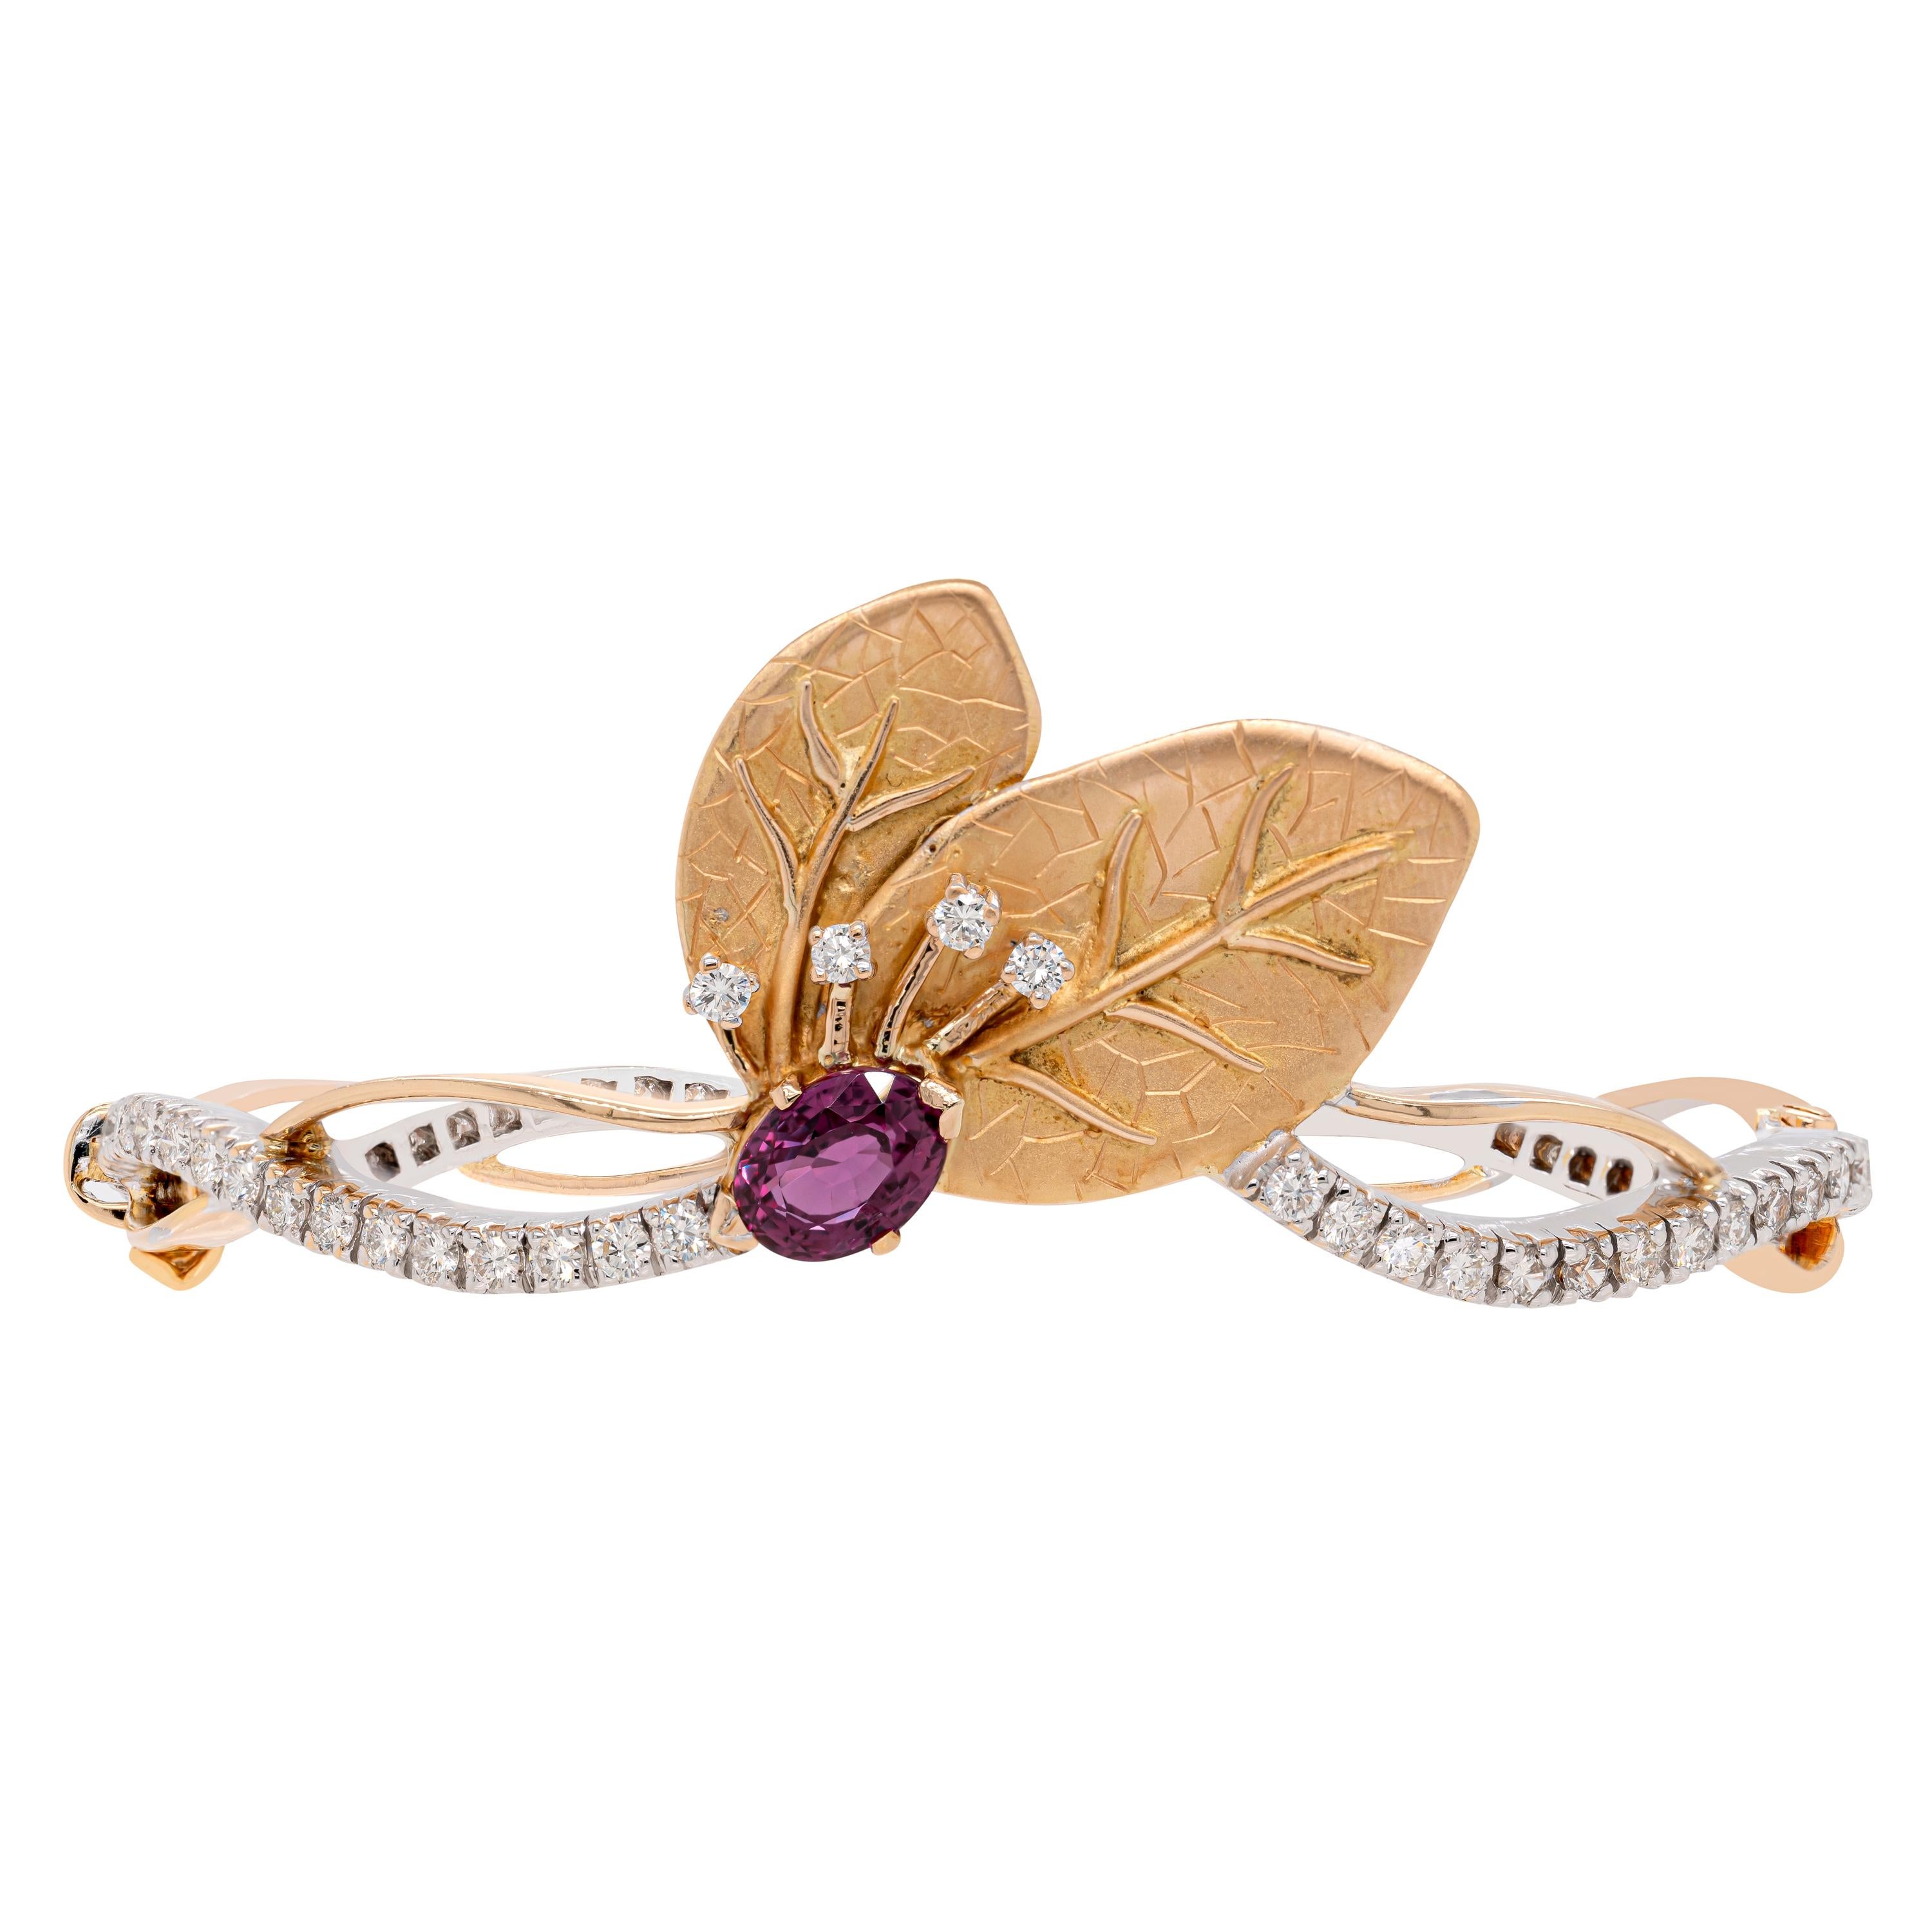 This gorgeous 18 carat gold bangle features a 1.66ct oval shaped pink tourmaline in the centre, highlighted by two beautifully detailed solid yellow gold leaves which are decorated with a spray of four round brilliant cut diamonds. The bangle's